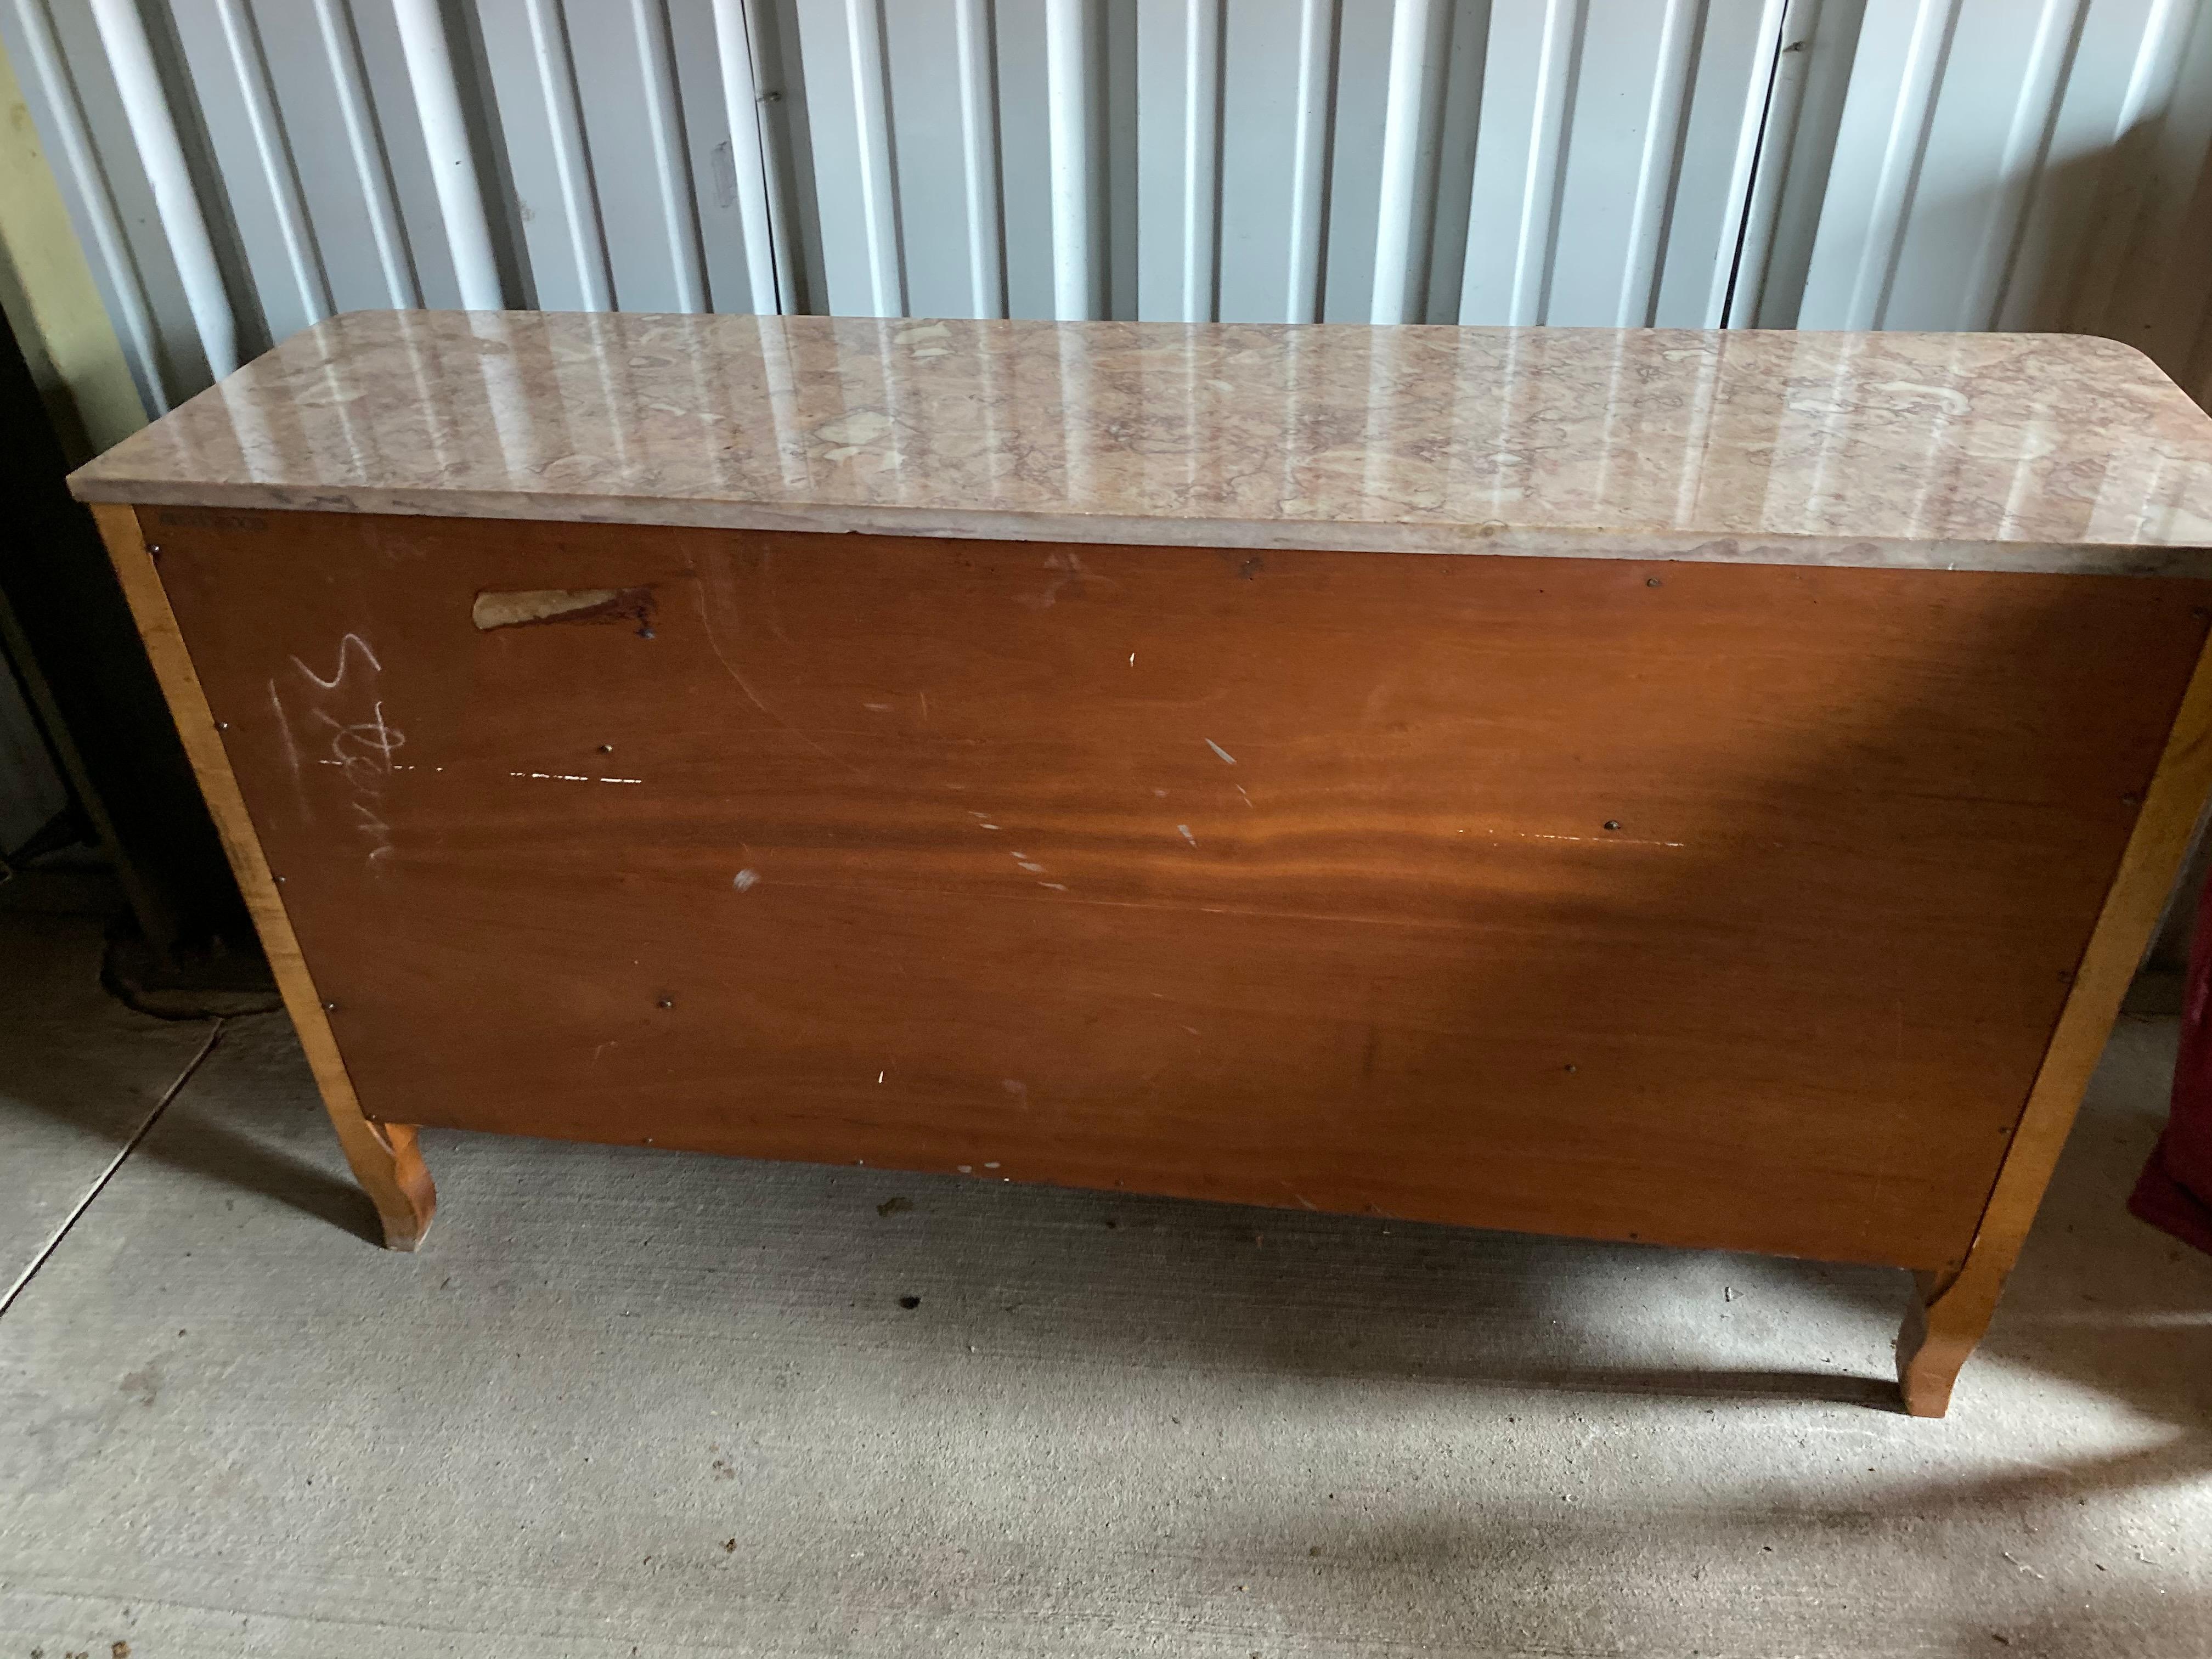 Midcentury sideboard or credenza Secretairie
Marble topped credenza; scalloped edges, side cabinets with shelving, and the most beautiful pull-out secretaire desk with small drawers and cubbies.
Beautifully designed and made midcentury